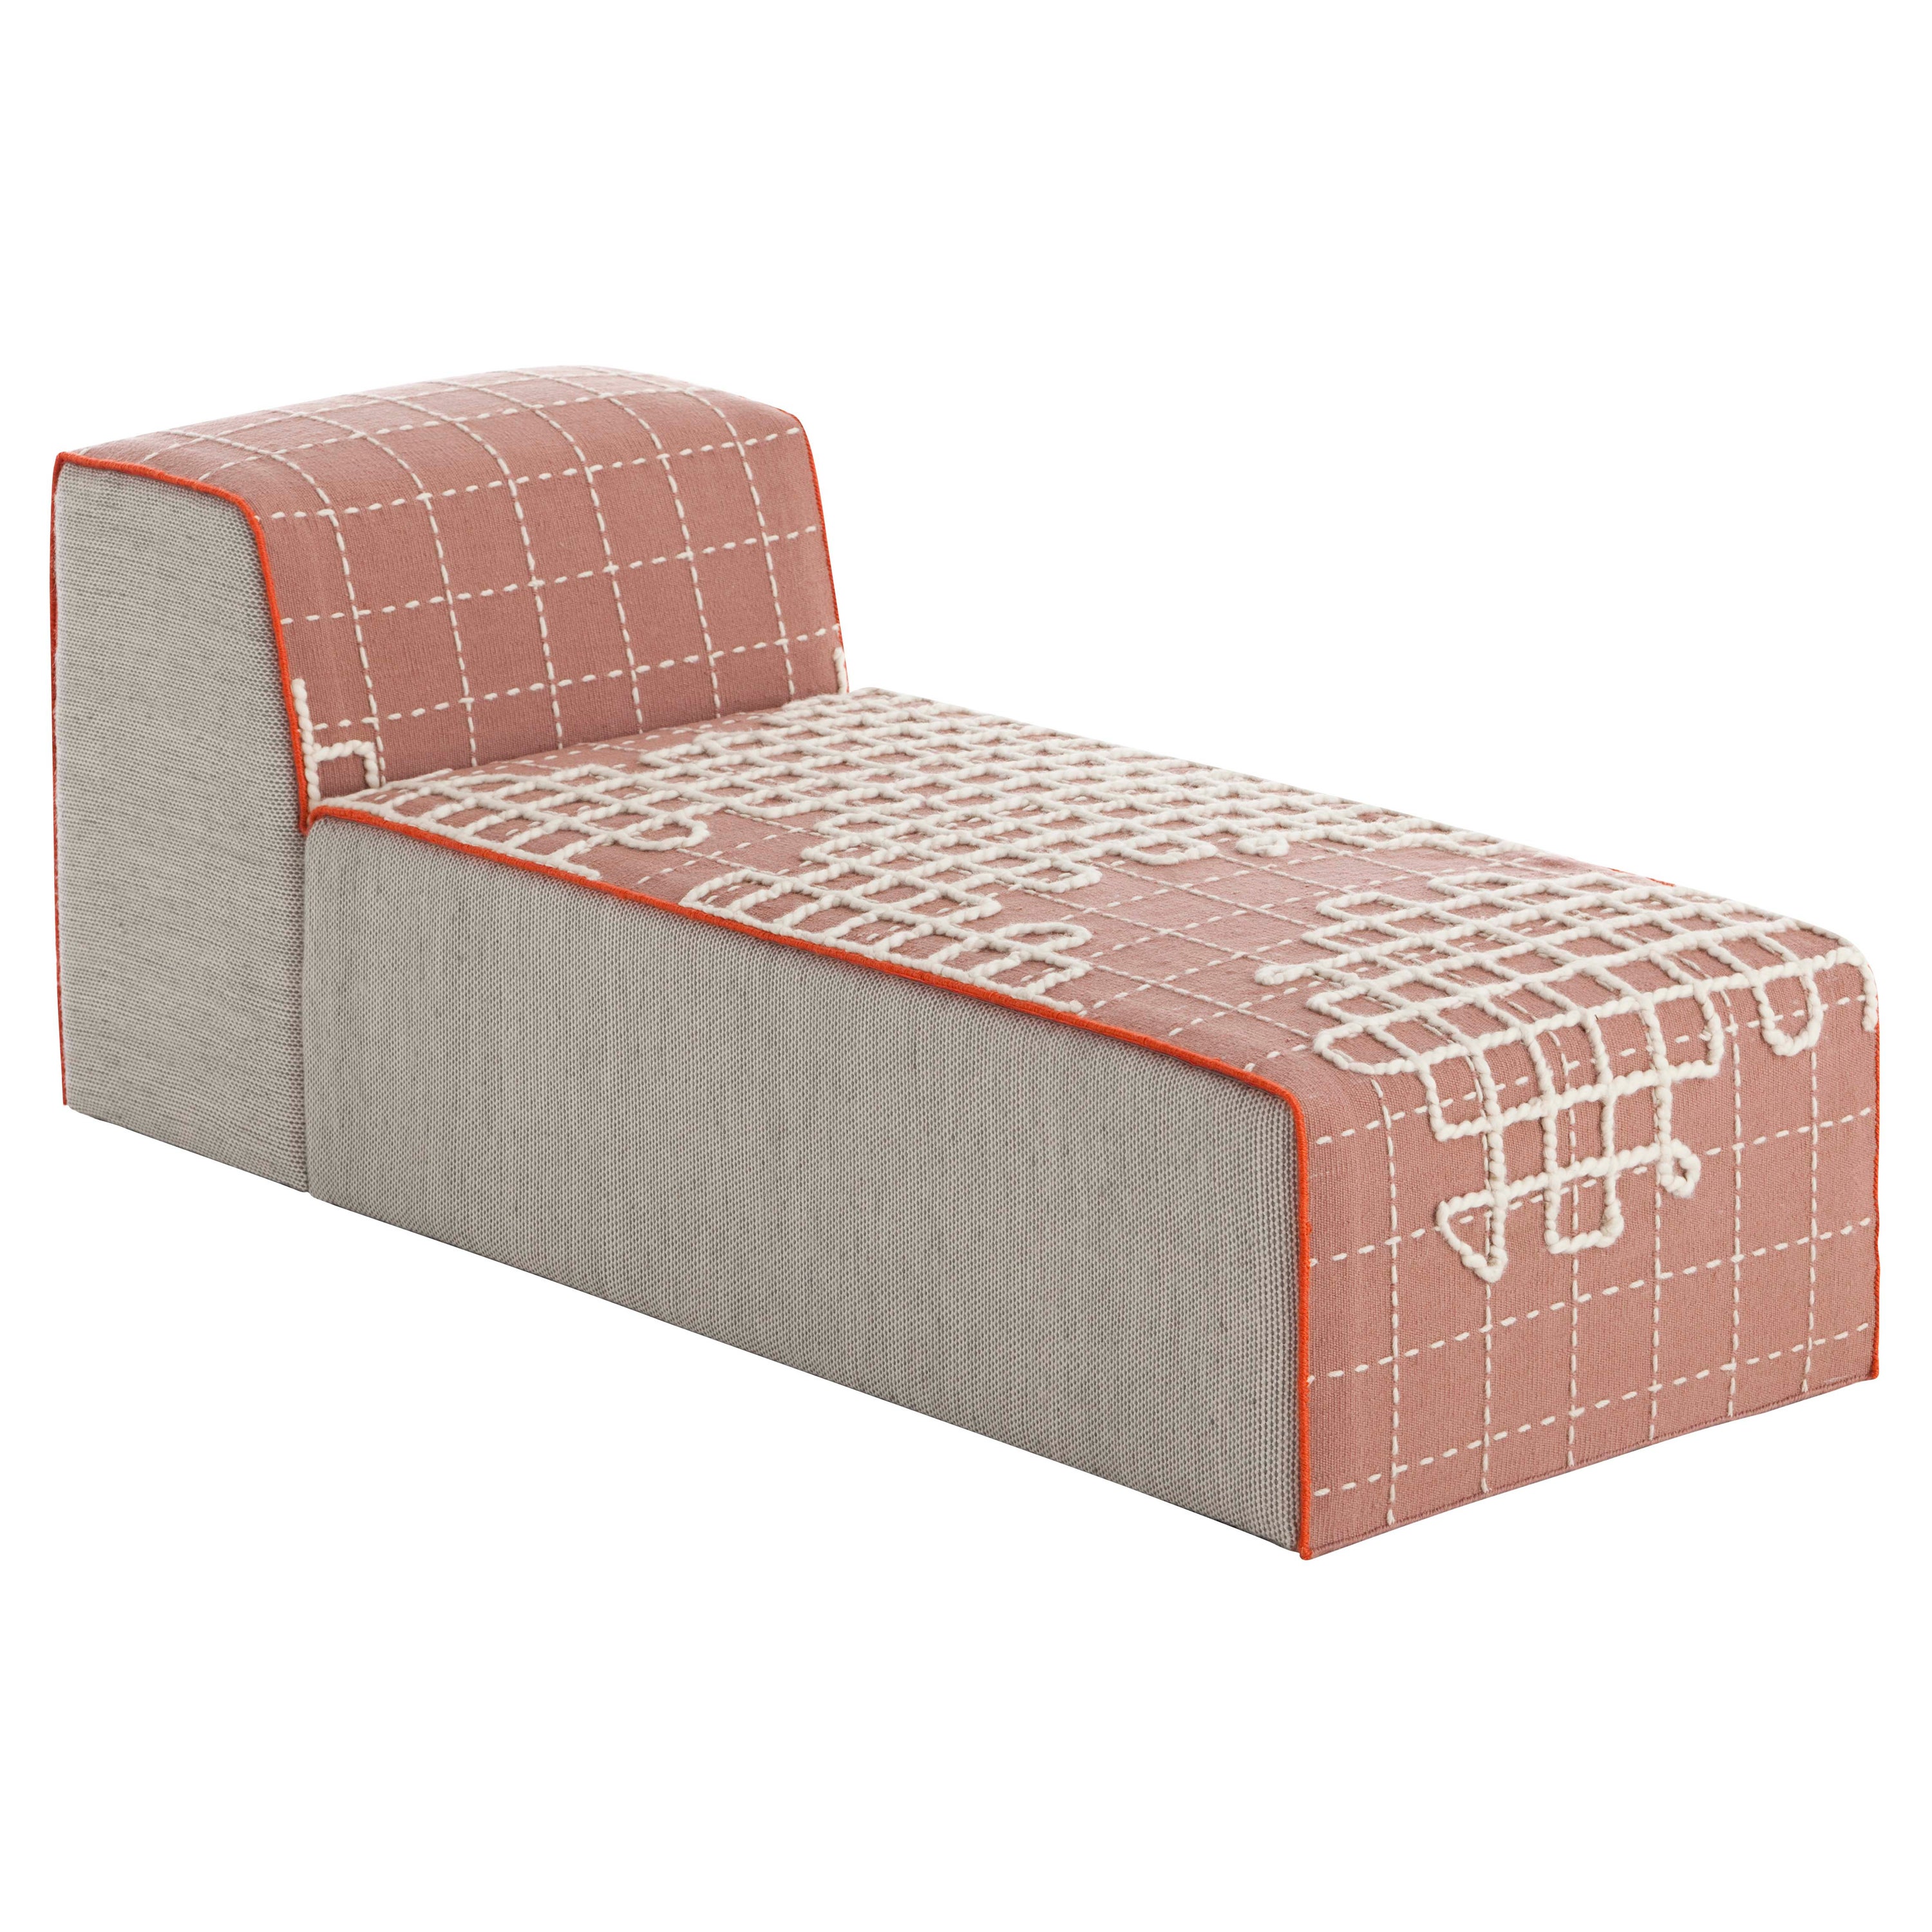 GAN Spaces Bandas Chaise Longue in A Pink with Wood Frame by Patricia Urquiola For Sale